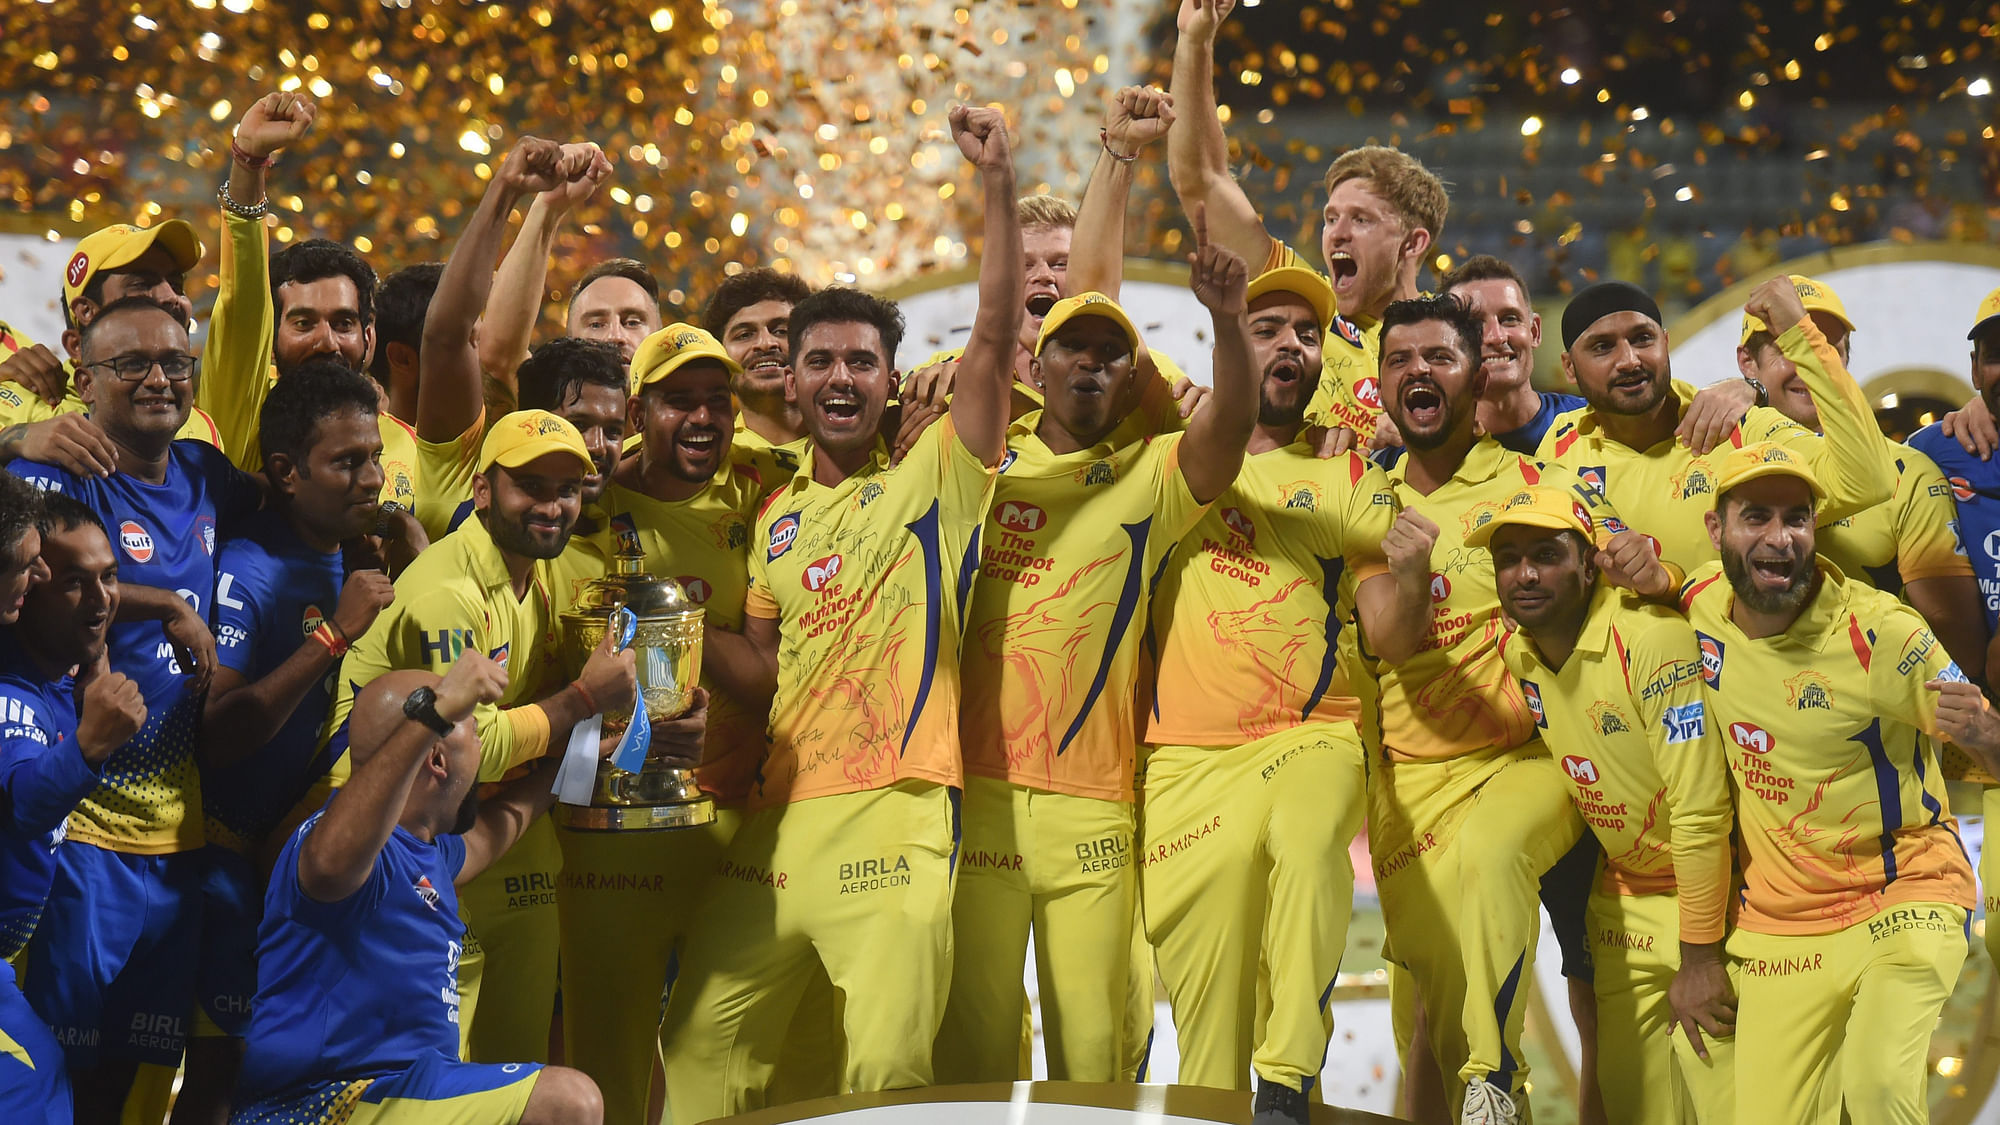 File photo of the Chennai Super Kings celebrating their IPL 2018 title victory.